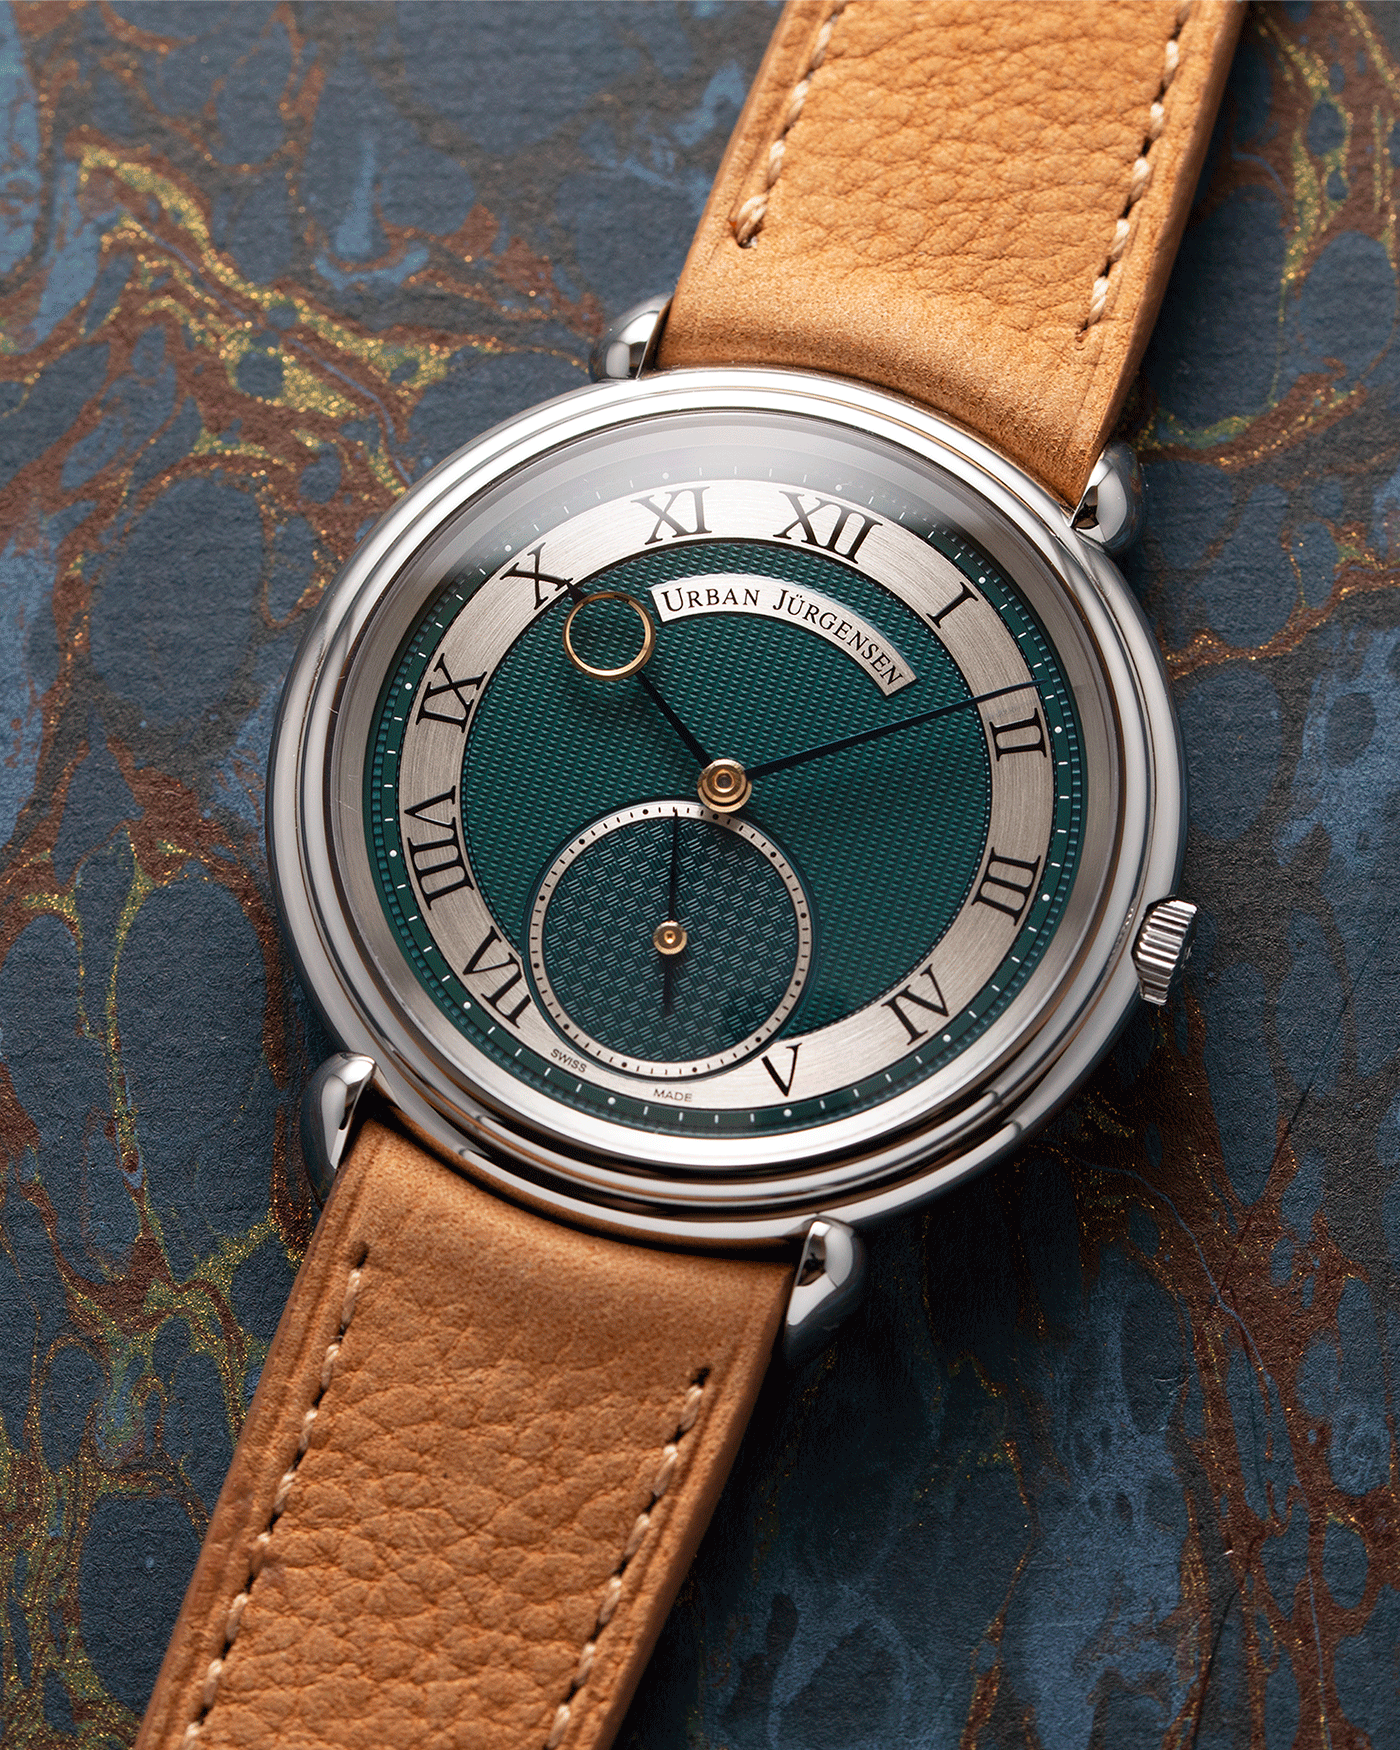 Brand: Urban Jurgensen Year: 2020 Model: Big 8 London Edition Material: Stainless Steel Movement: Frederic Piguet cal. 1160 Case Diameter: 40mm Strap: Chestnut Brown Suede Strap by A Collected Man and Stainless Steel Urban Jurgensen Tang Buckle